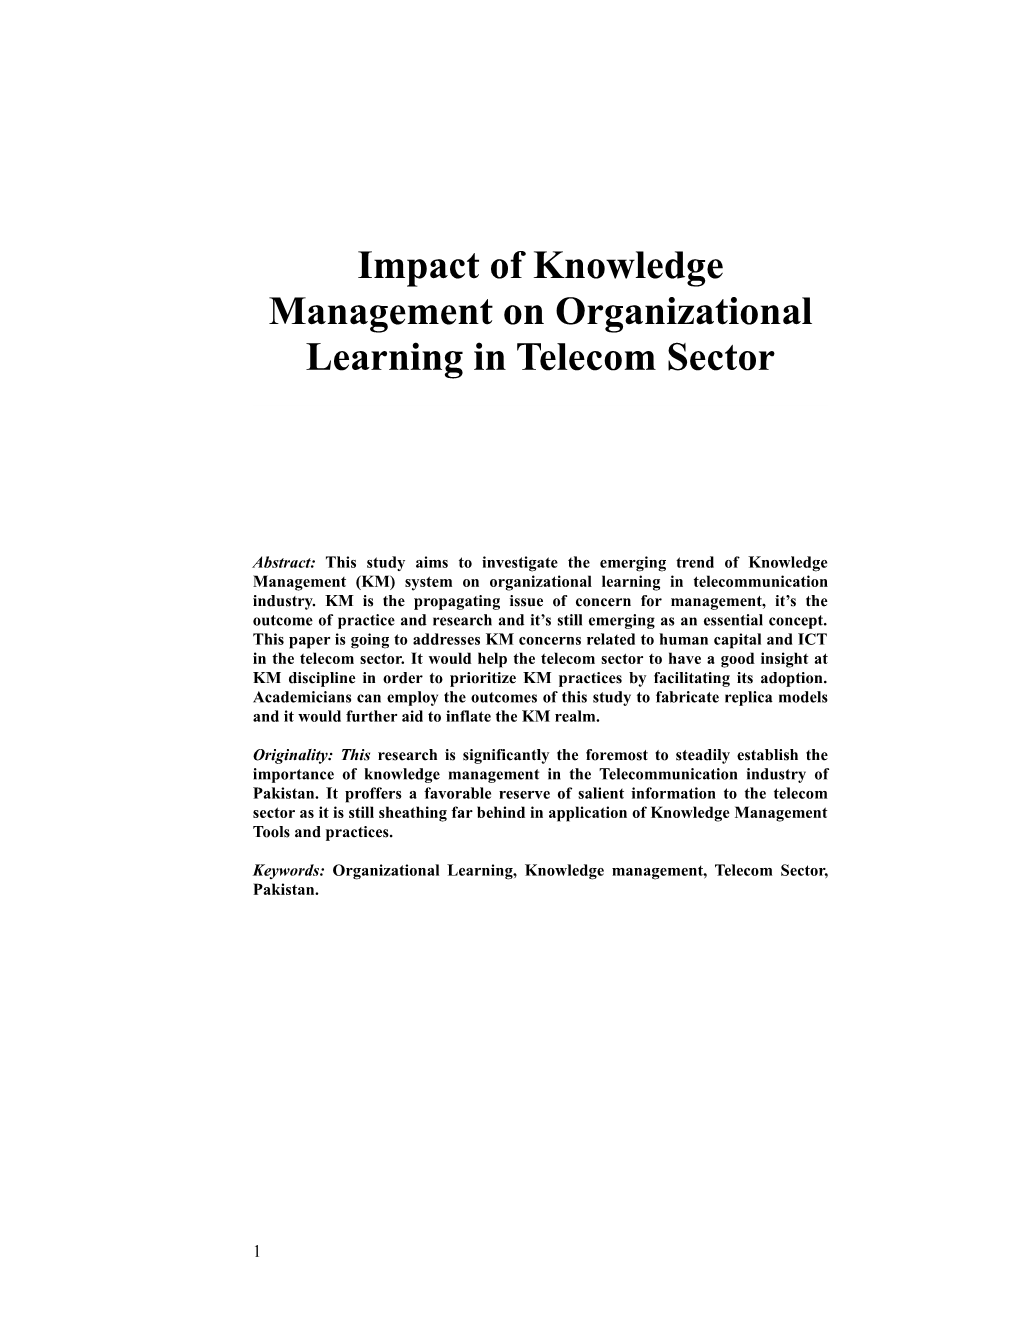 Impact of Knowledge Management on Organizational Learning in Telecom Sector